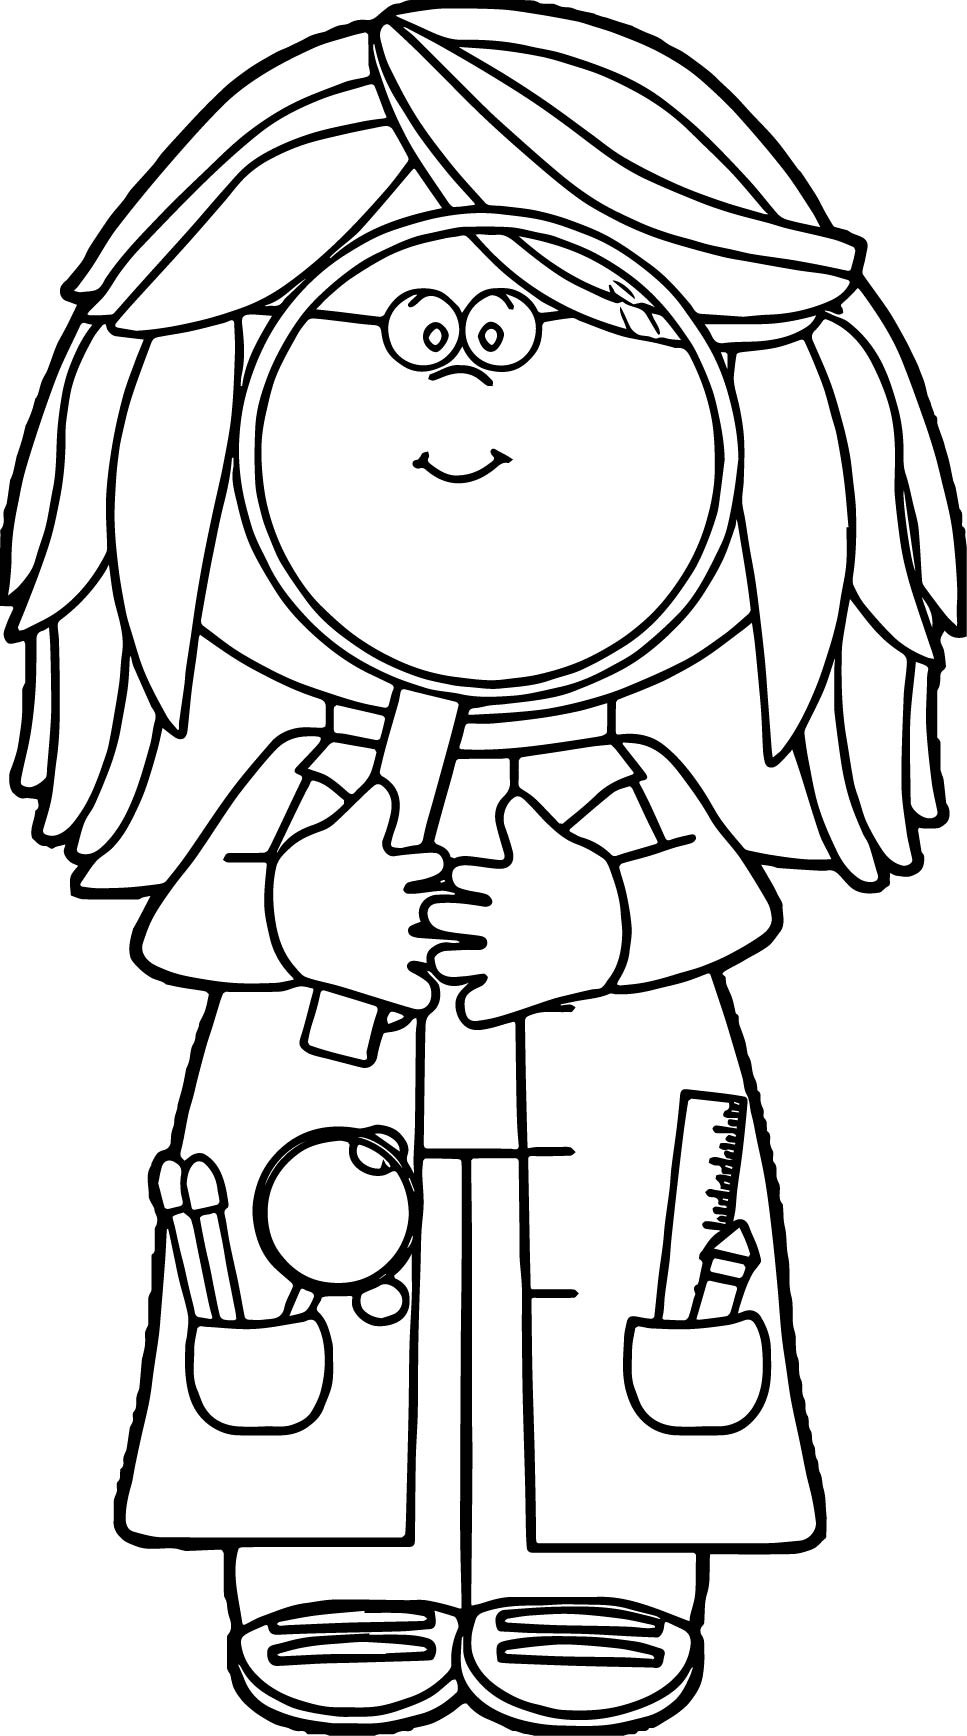 Scientist Coloring Sheet
 Kid Scientist Looking Through Magnifying Glass Coloring